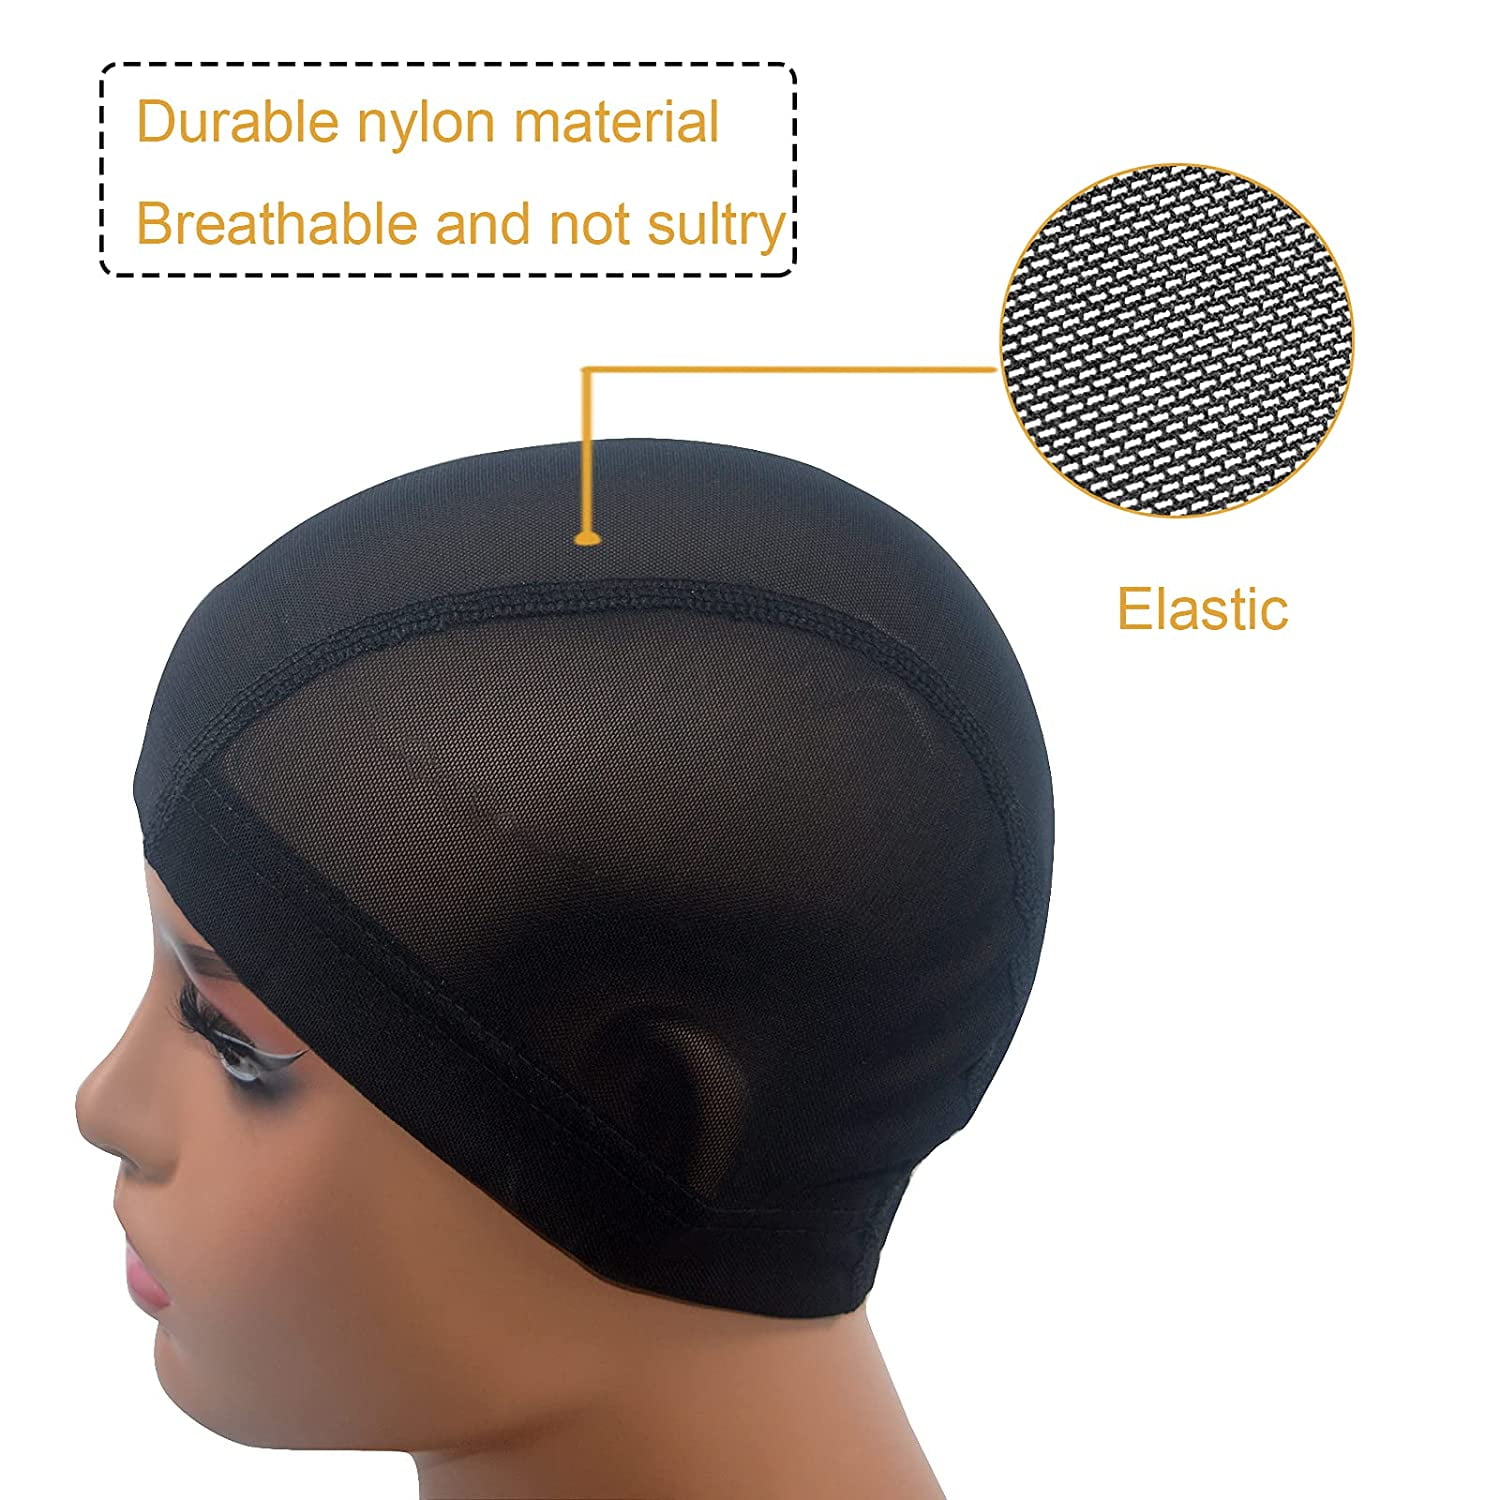 Wig Net Cap Stretch Mesh Wig Cap Elastic Net Weaving Cap Durable Wig  Stocking Cap Soft Mesh Dome Wig Pack of 3 1 Black+2 Skin Color Durable and  Useful